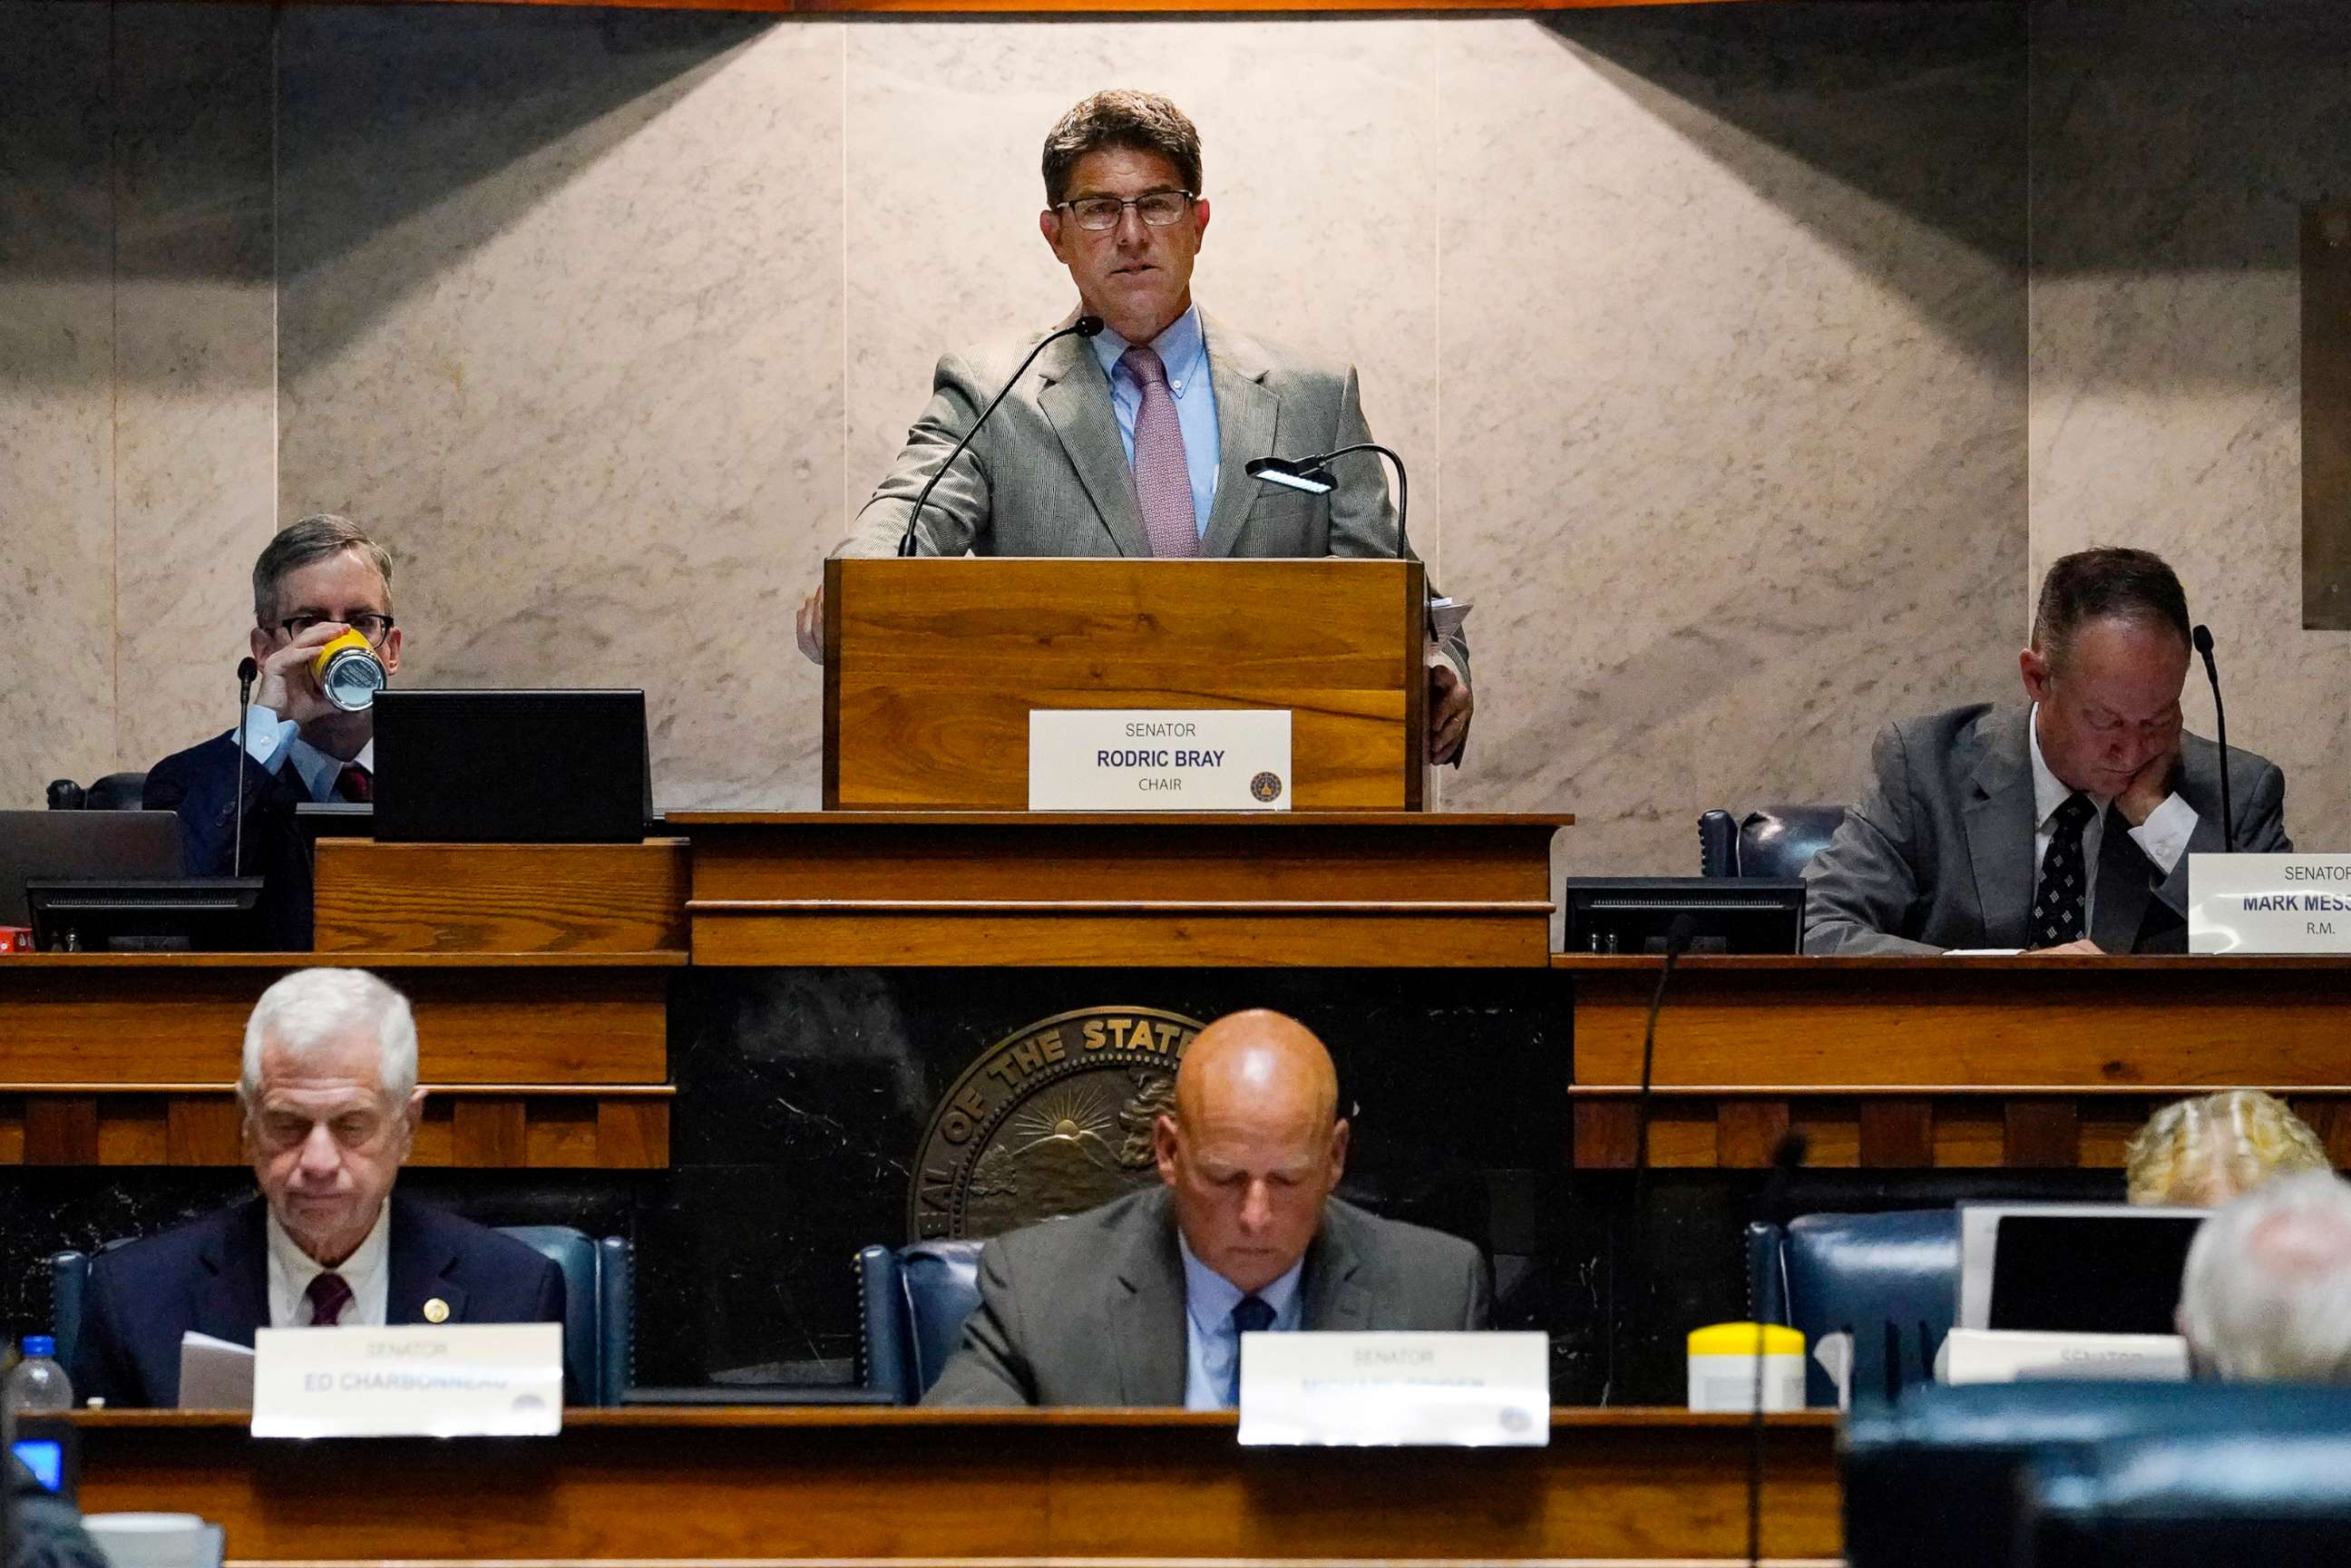 PHOTO: Senate President Pro Tem Rodric Bray opens the second day of hearings by the Indiana Senate Rules Committee as they take testimony on a Republican proposal to ban nearly all abortions in the state at the Statehouse in Indianapolis, July 26, 2022.